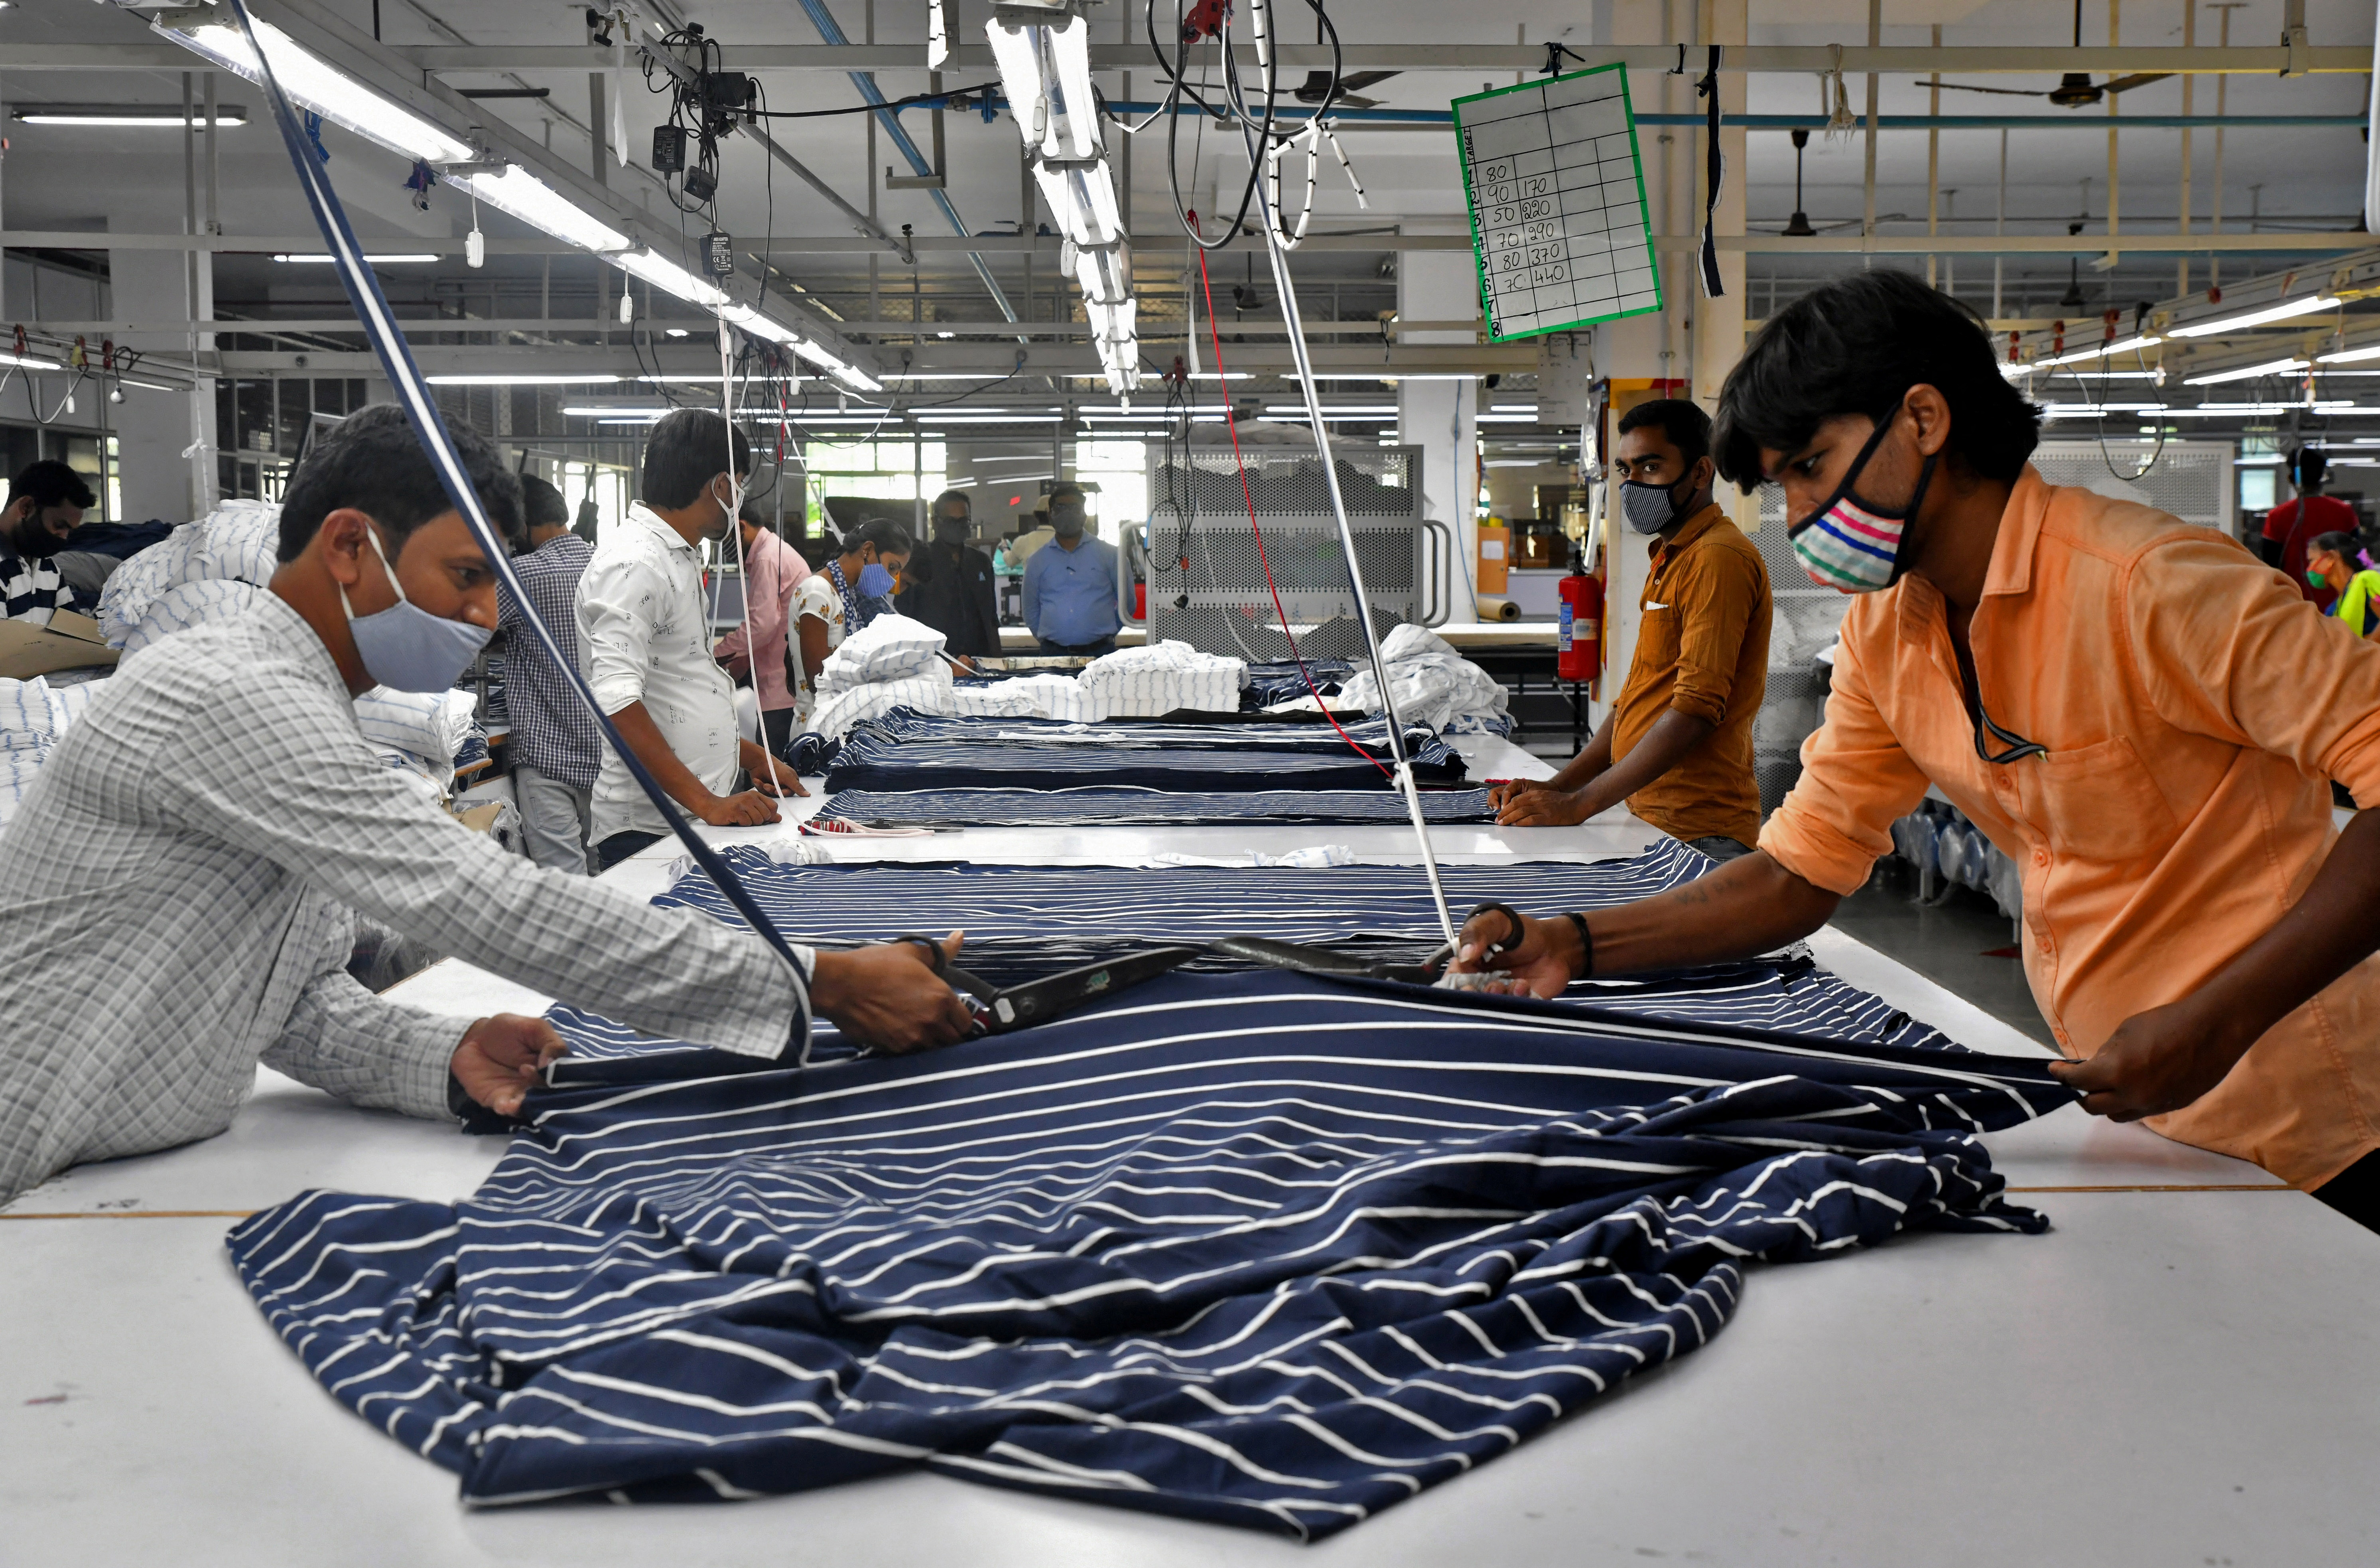 Here's what the Indian Textile Industry Wants - BusinessToday